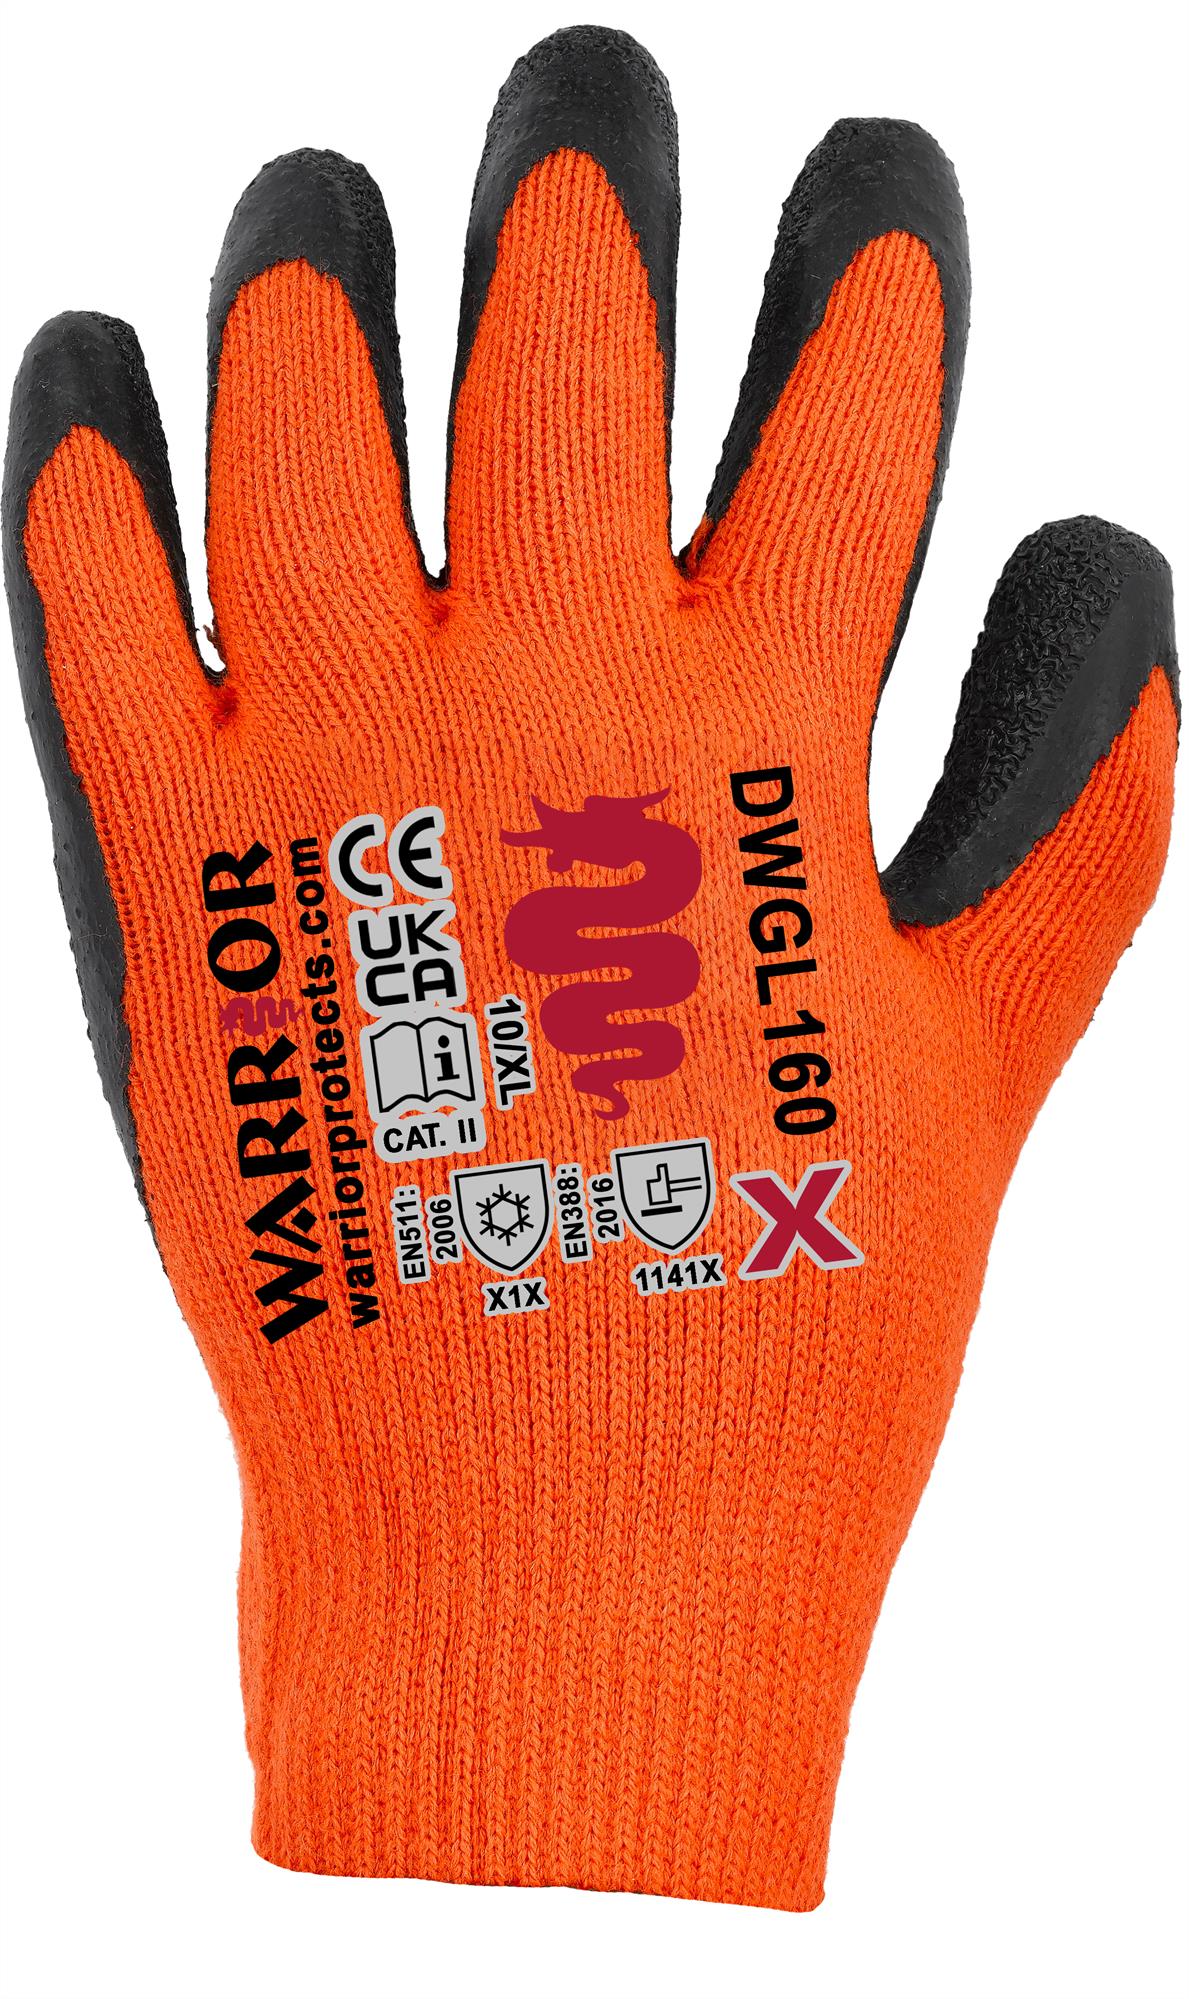 Warrior black latex thermal winter/cold-store work gloves (12 pairs)